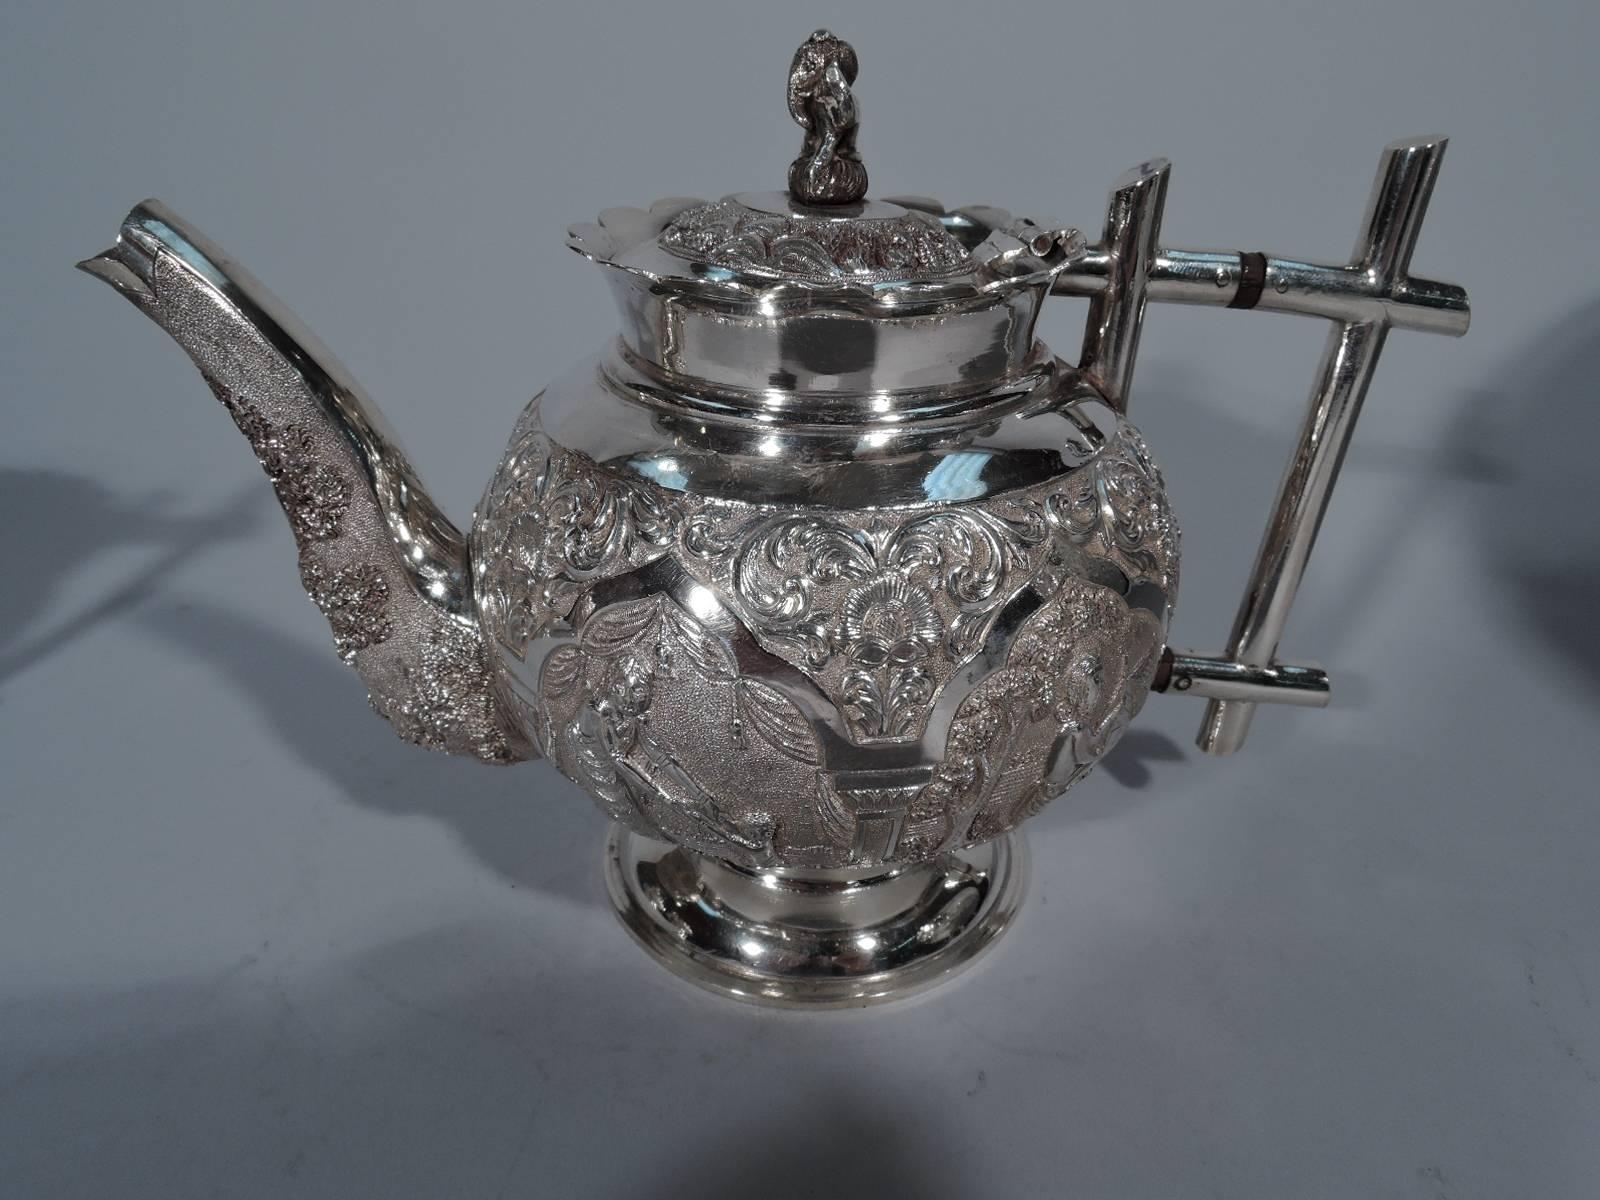 Colonial Indian silver tea set, circa 1900. This set comprises teapot, creamer and sugar.

Each: Globular with scalloped rim and stepped foot. Handles rectilinear brackets. Teapot has finial in form of elephant seated in lotus position. Decorated